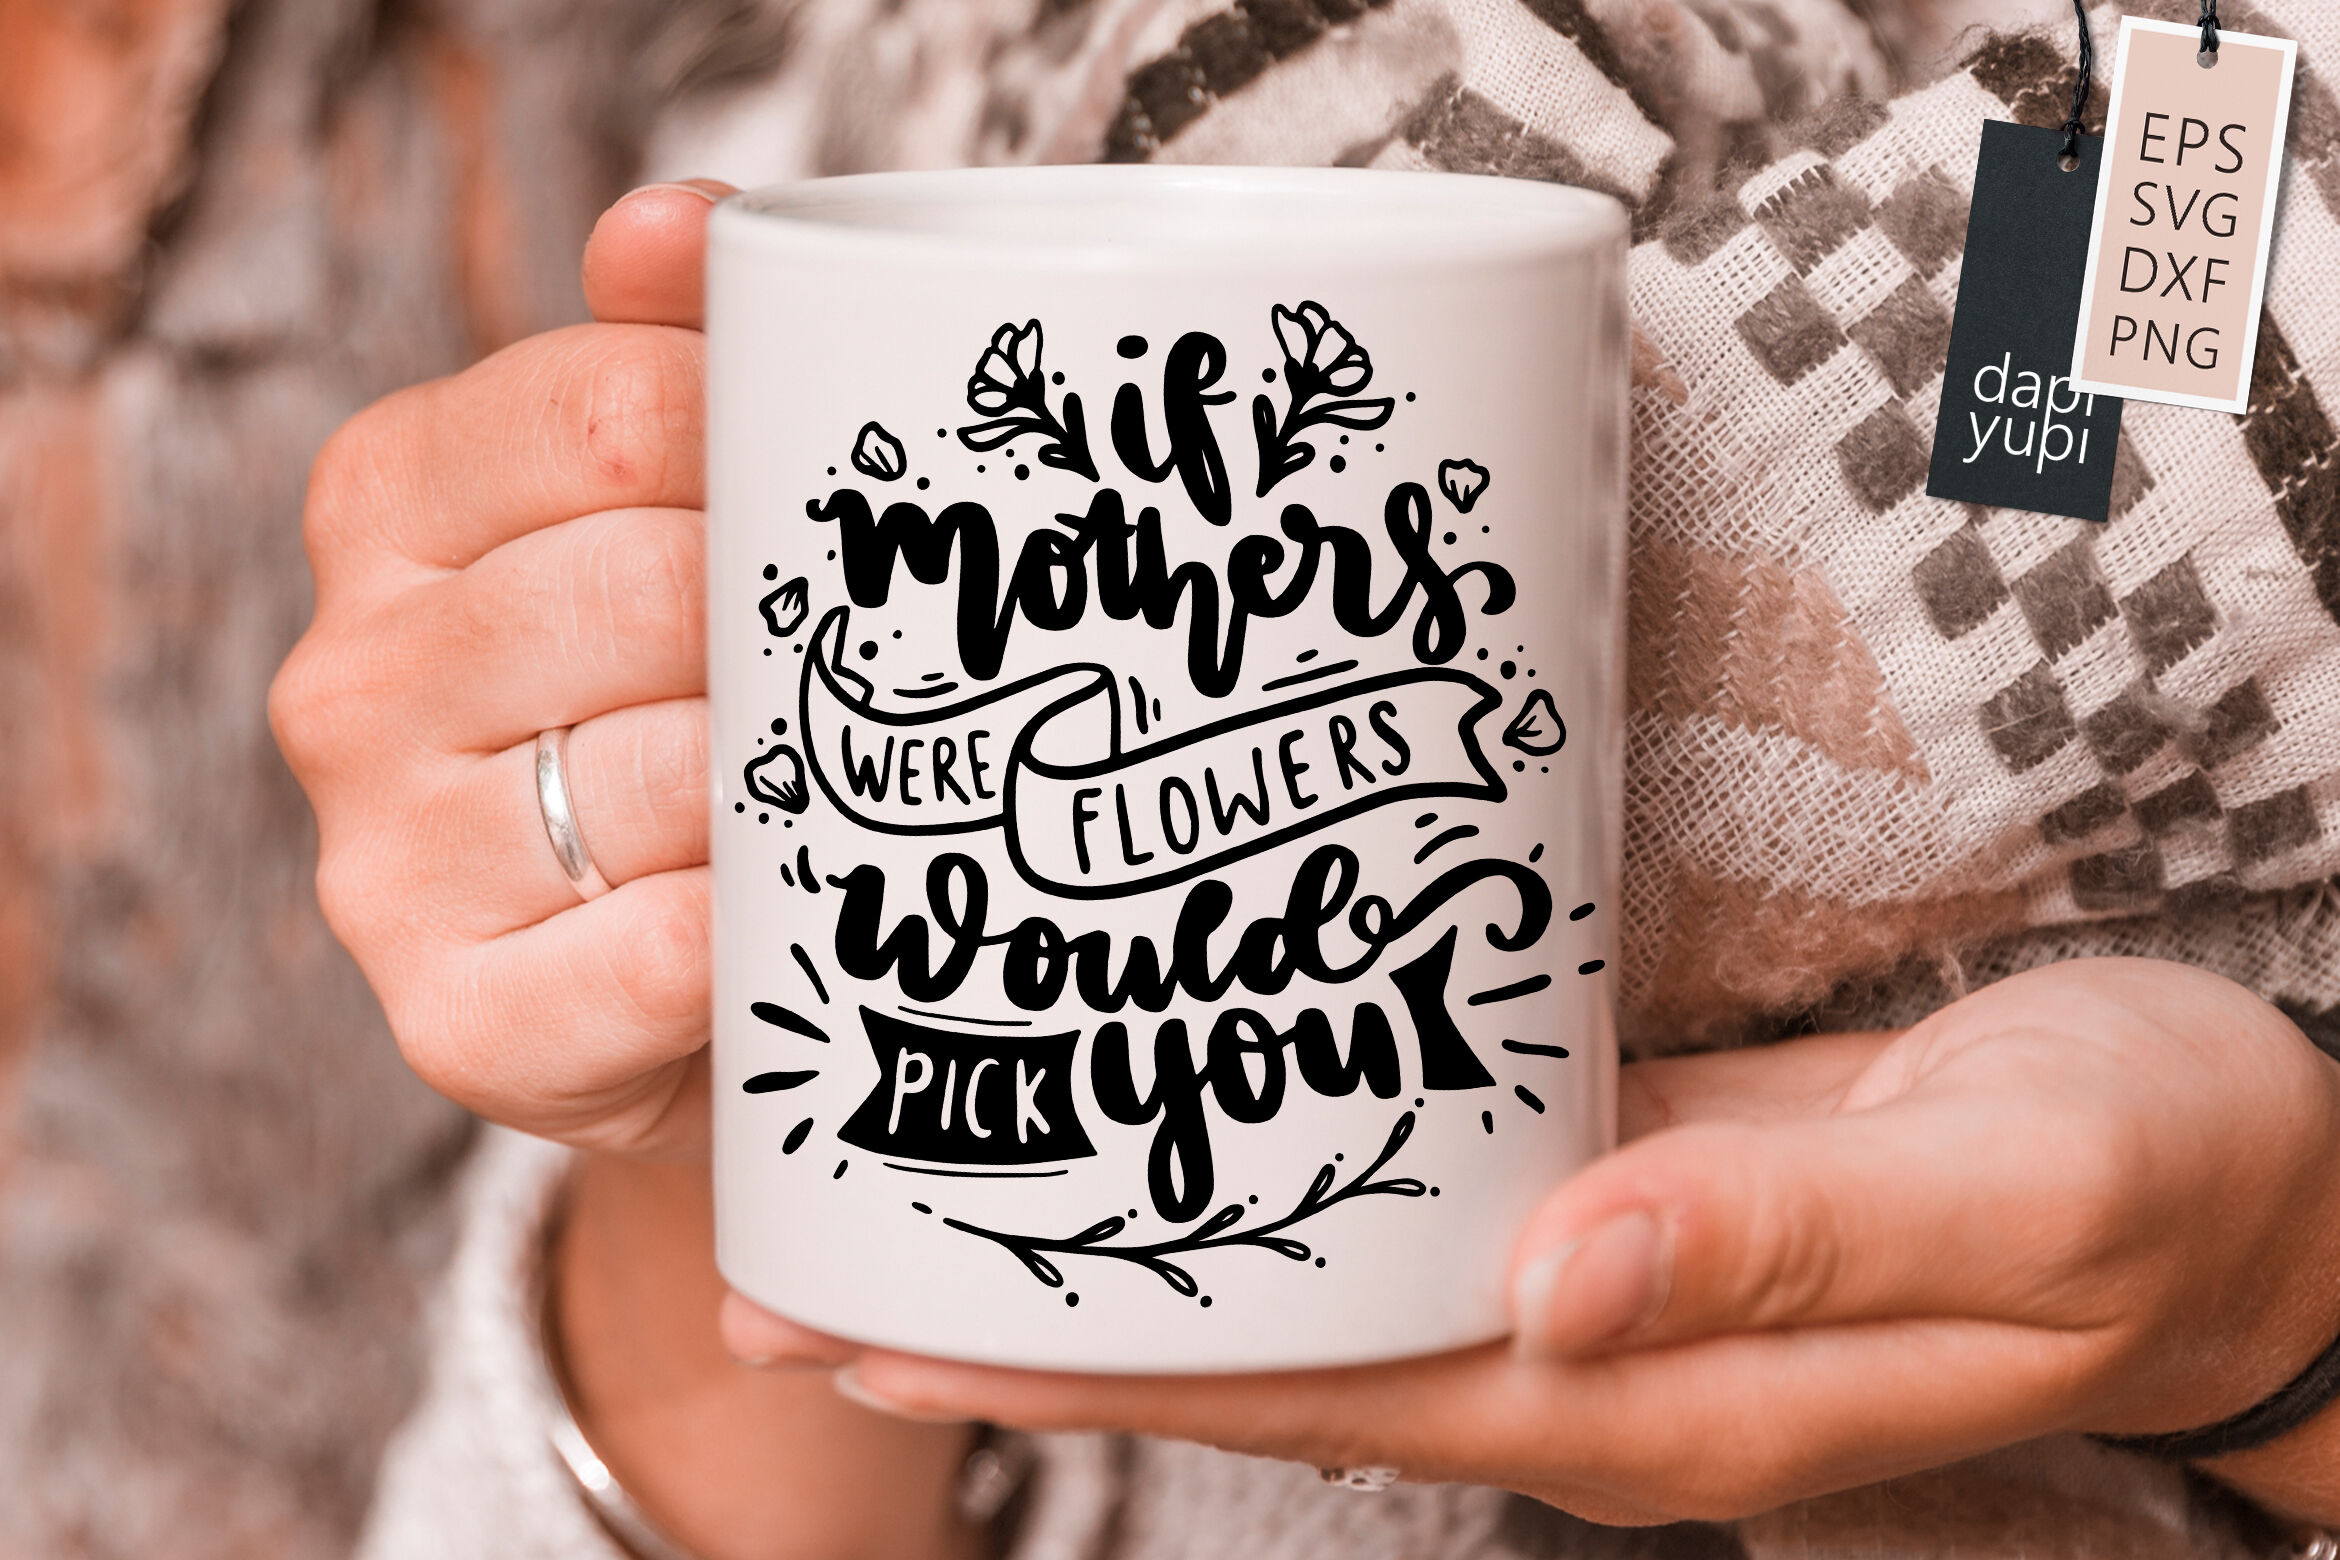 If Mothers Were Flowers Would Pick You Svg Mothers Day Quotes By Dapiyupi Thehungryjpeg